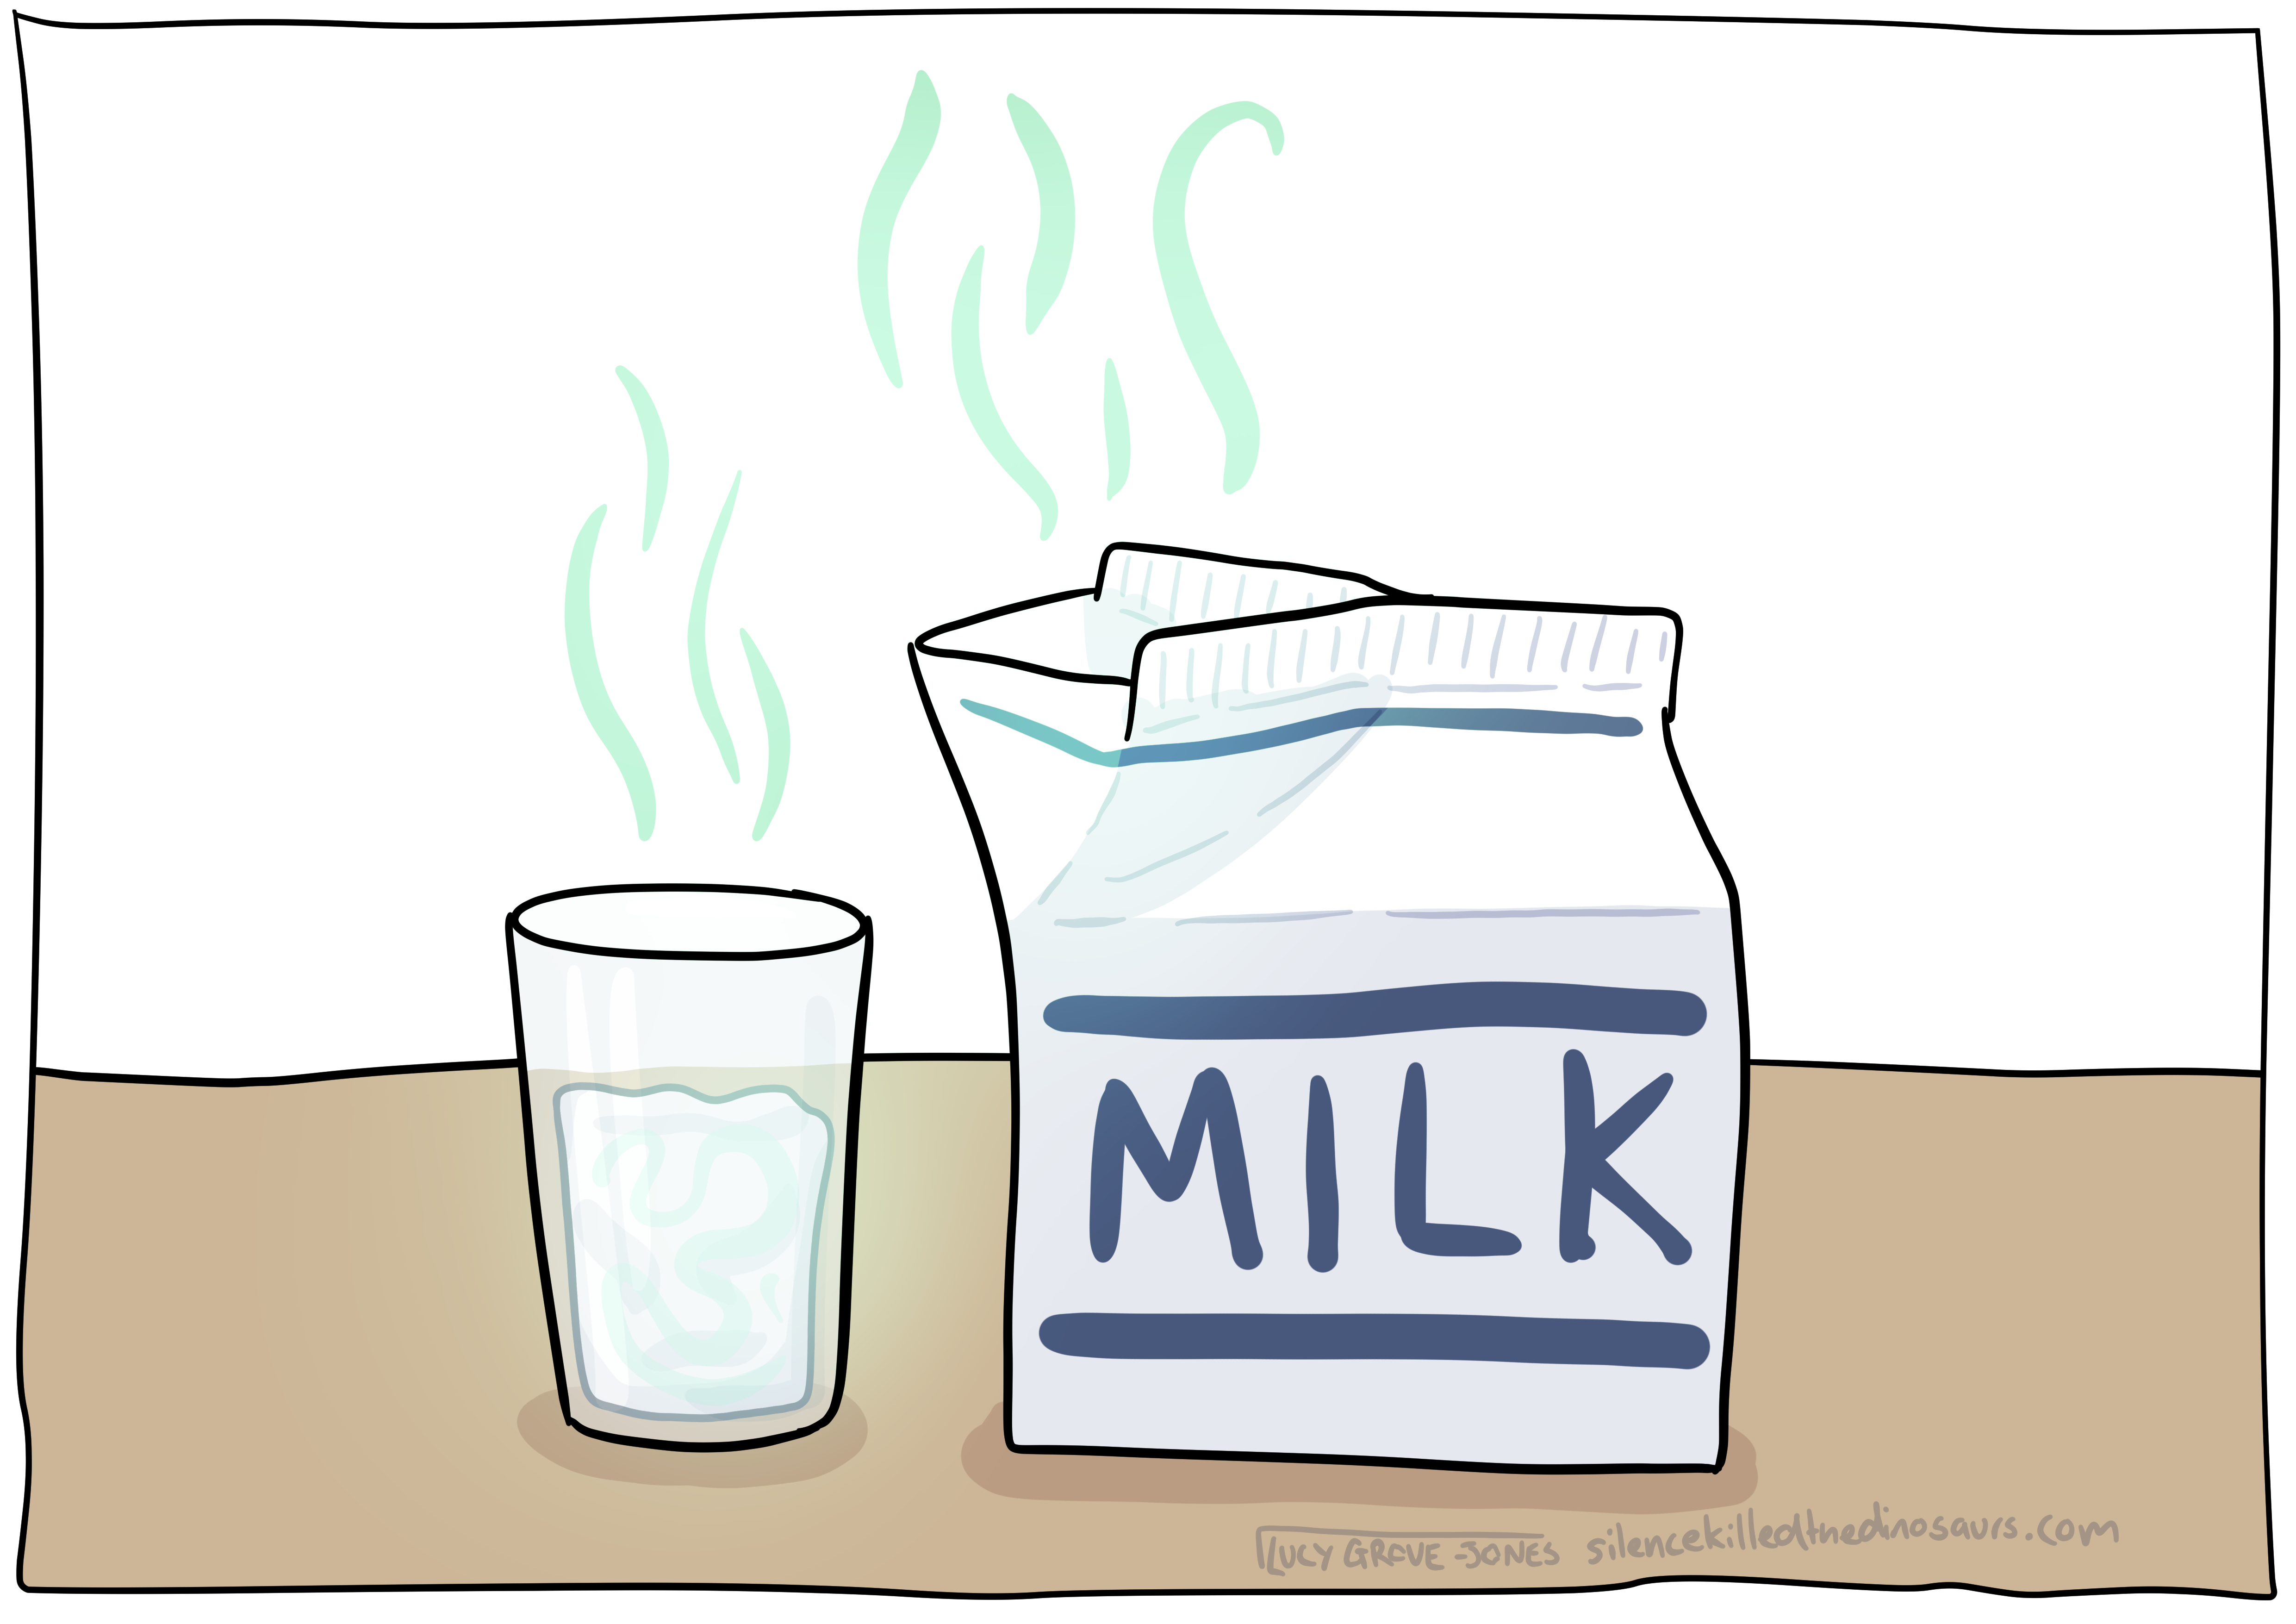 A carton of milk and a glass of milk on a bench. Smell lines radiate from both, and the content of the glass looks lumpy